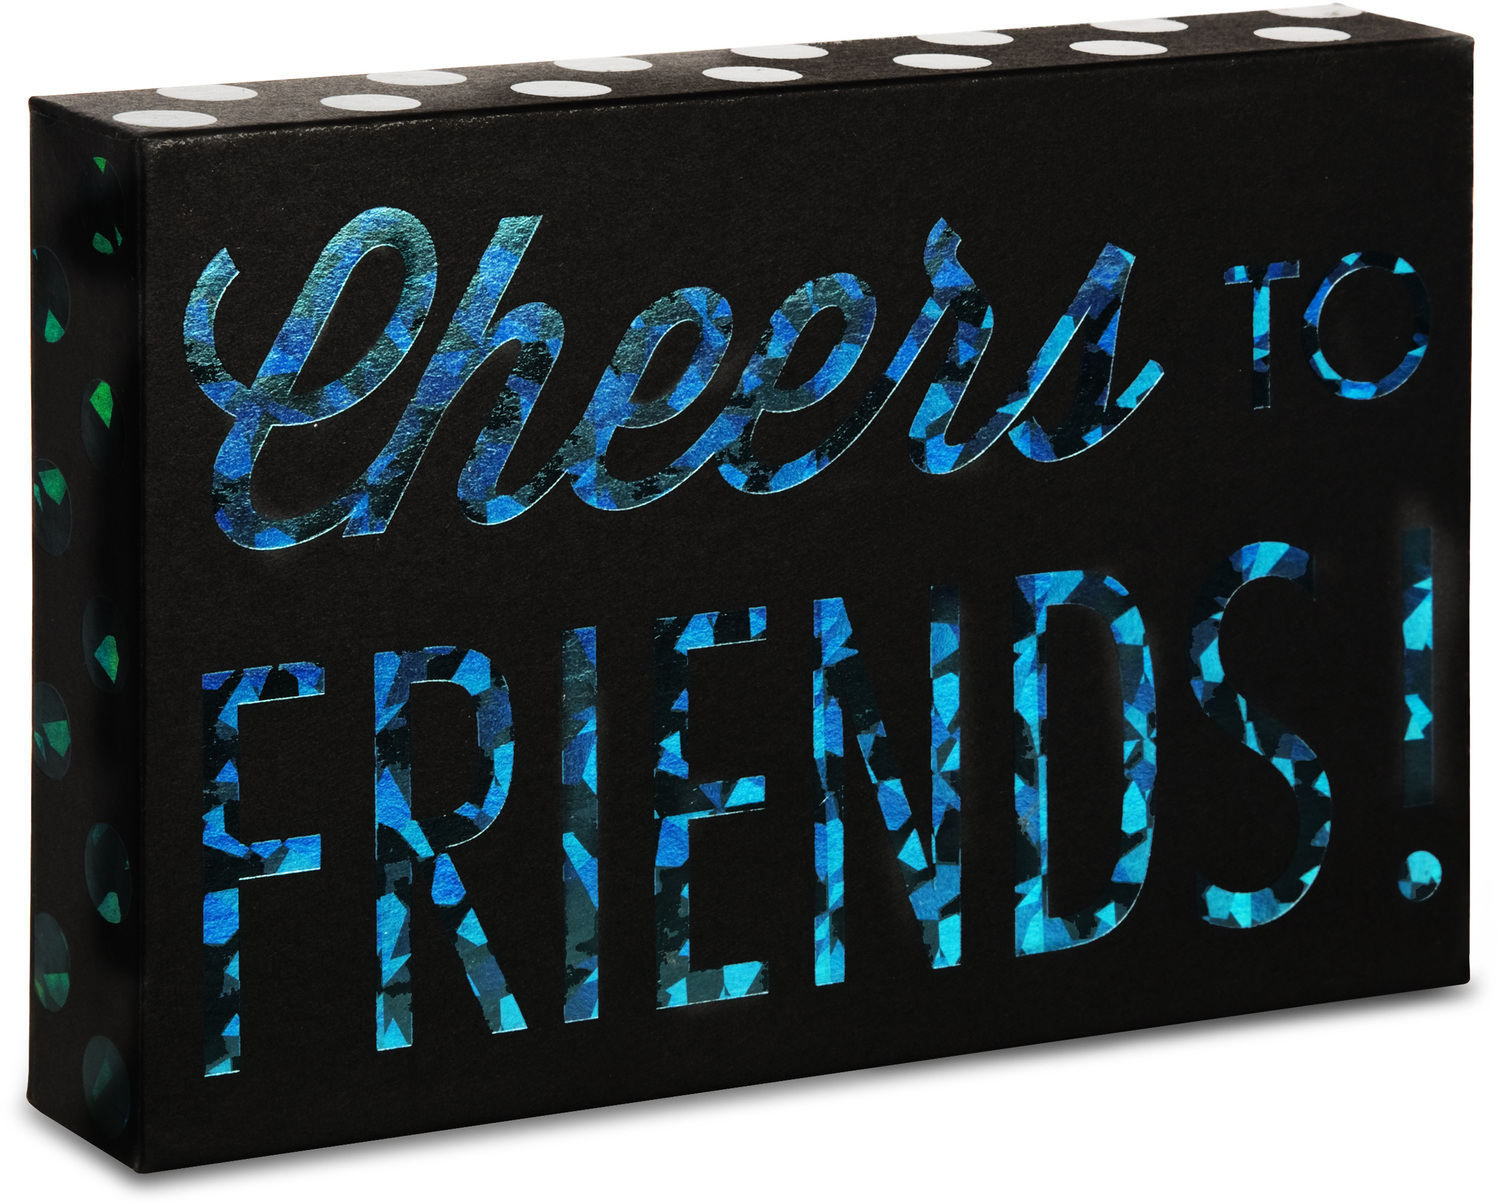 Friends by Hiccup - Friends - 6" x 4" Plaque